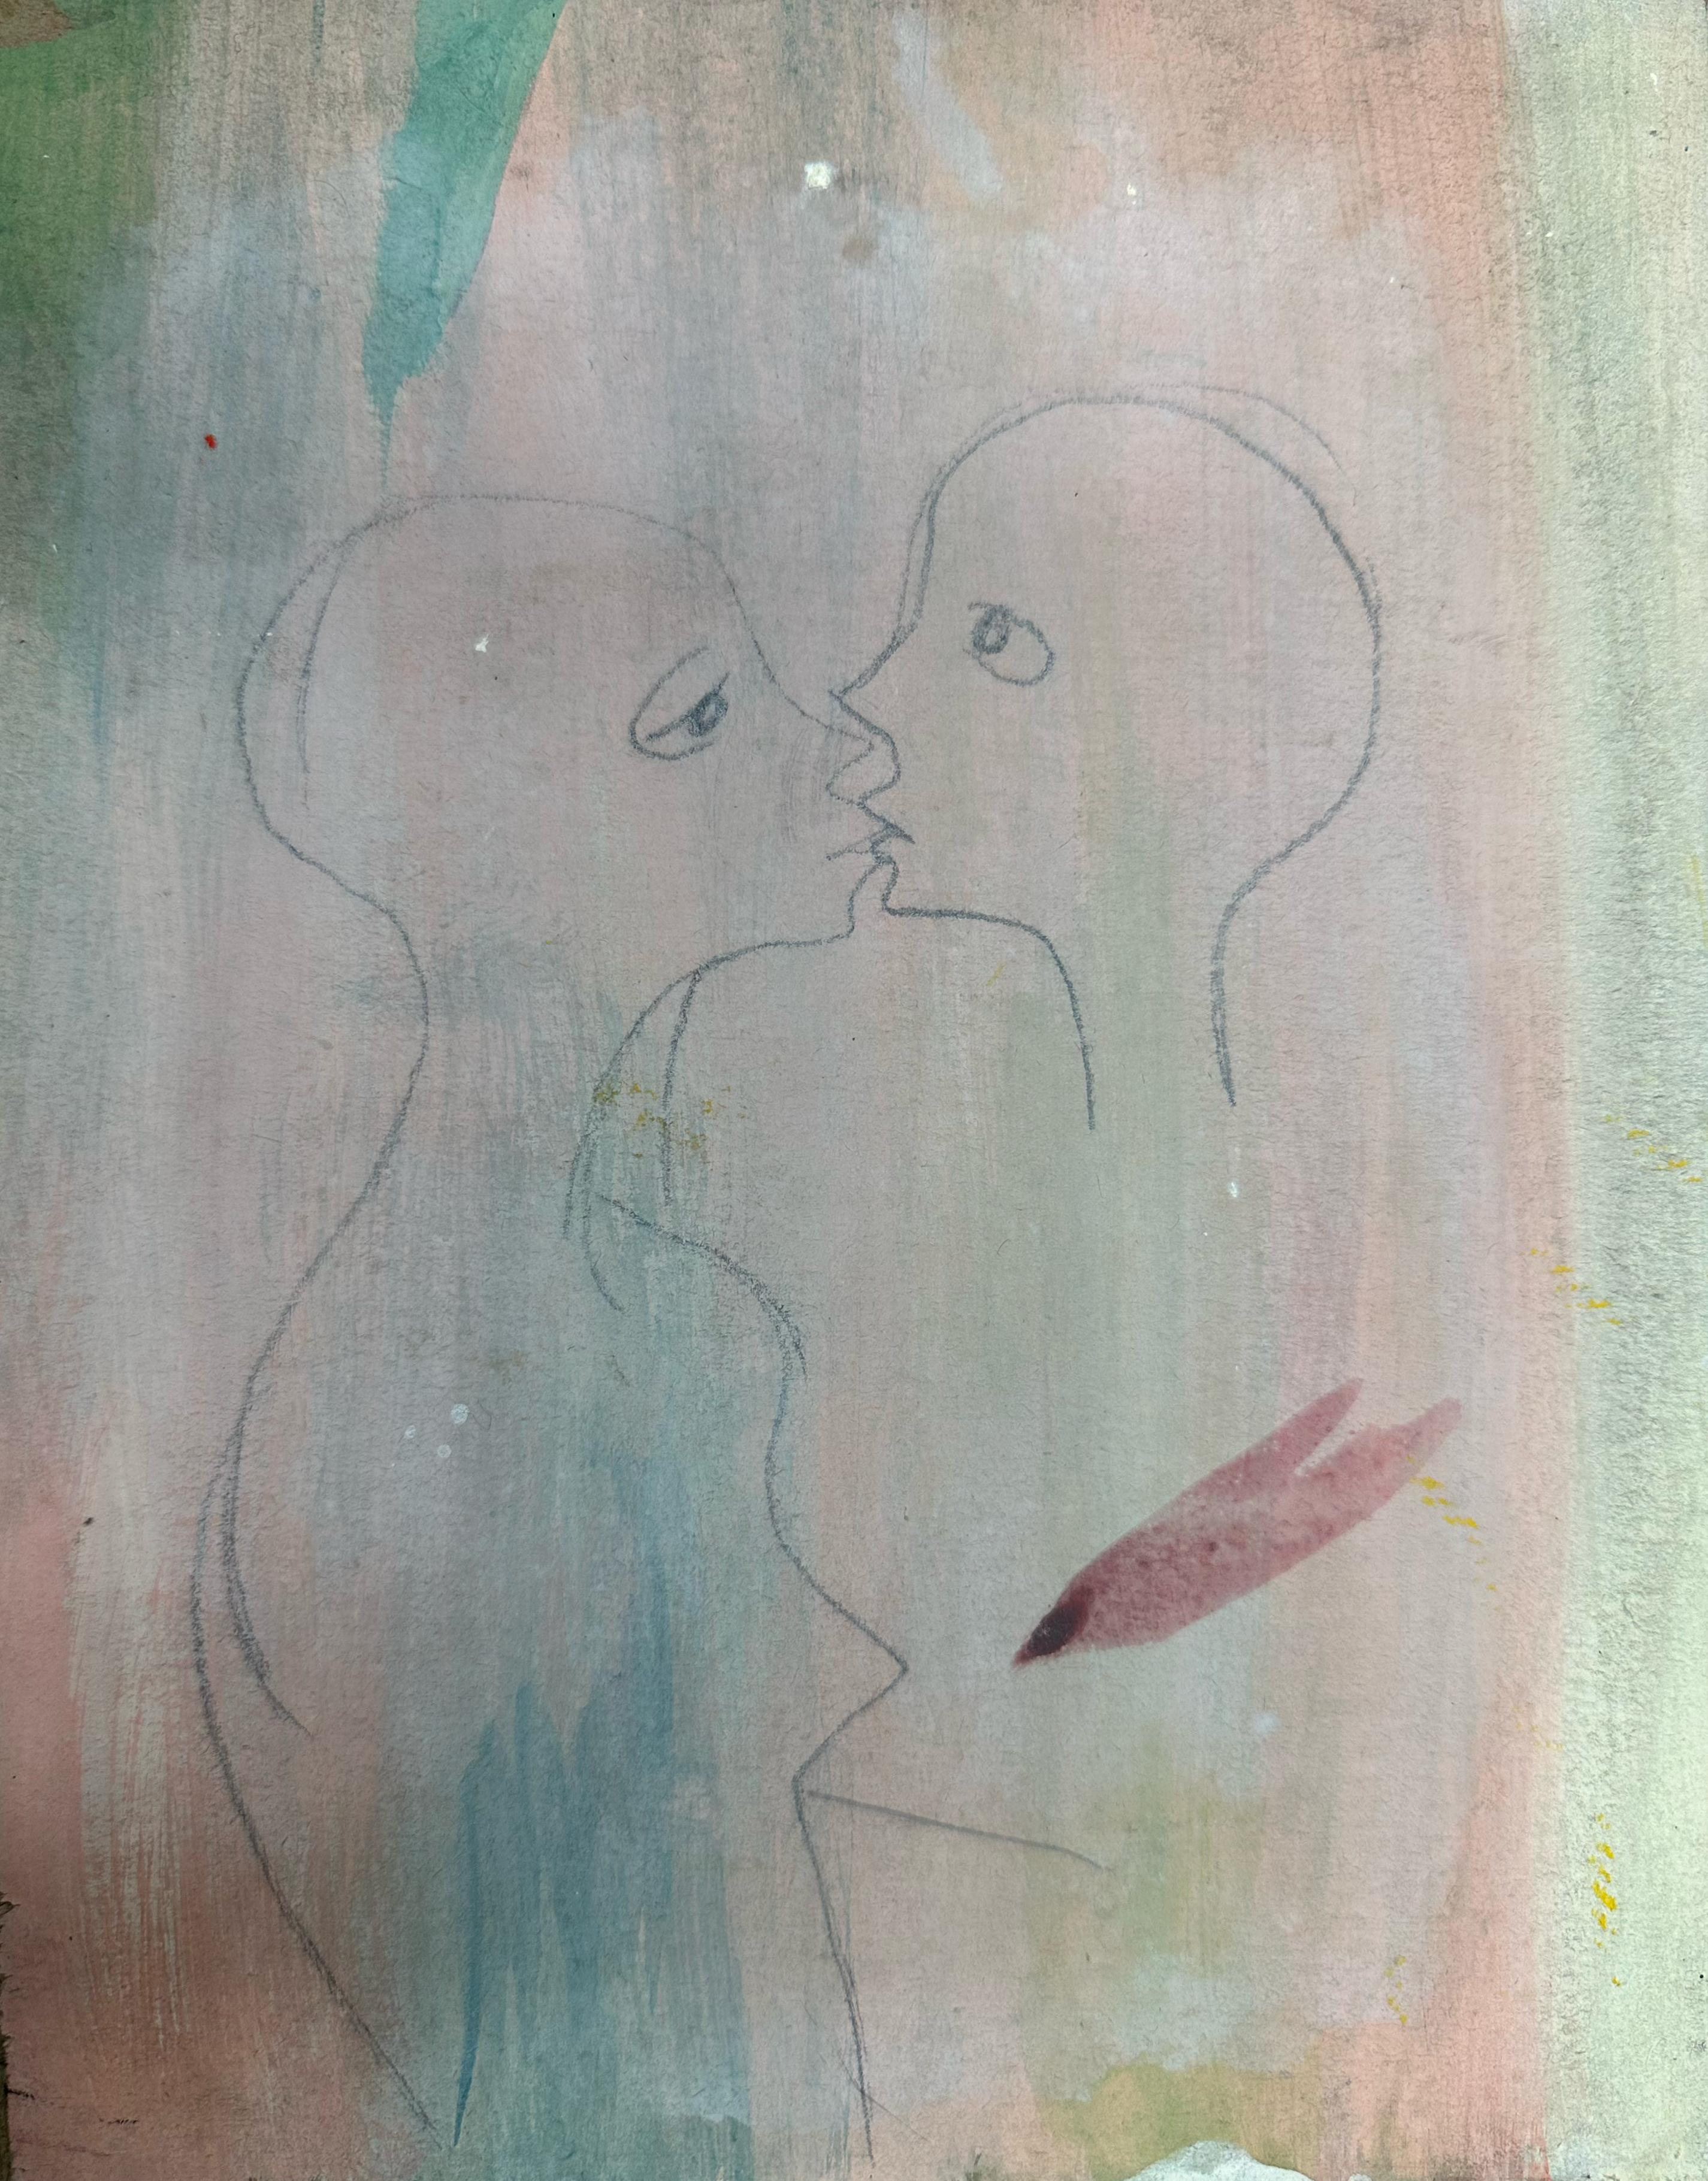 Two figures in outline kissing against an abstract background.